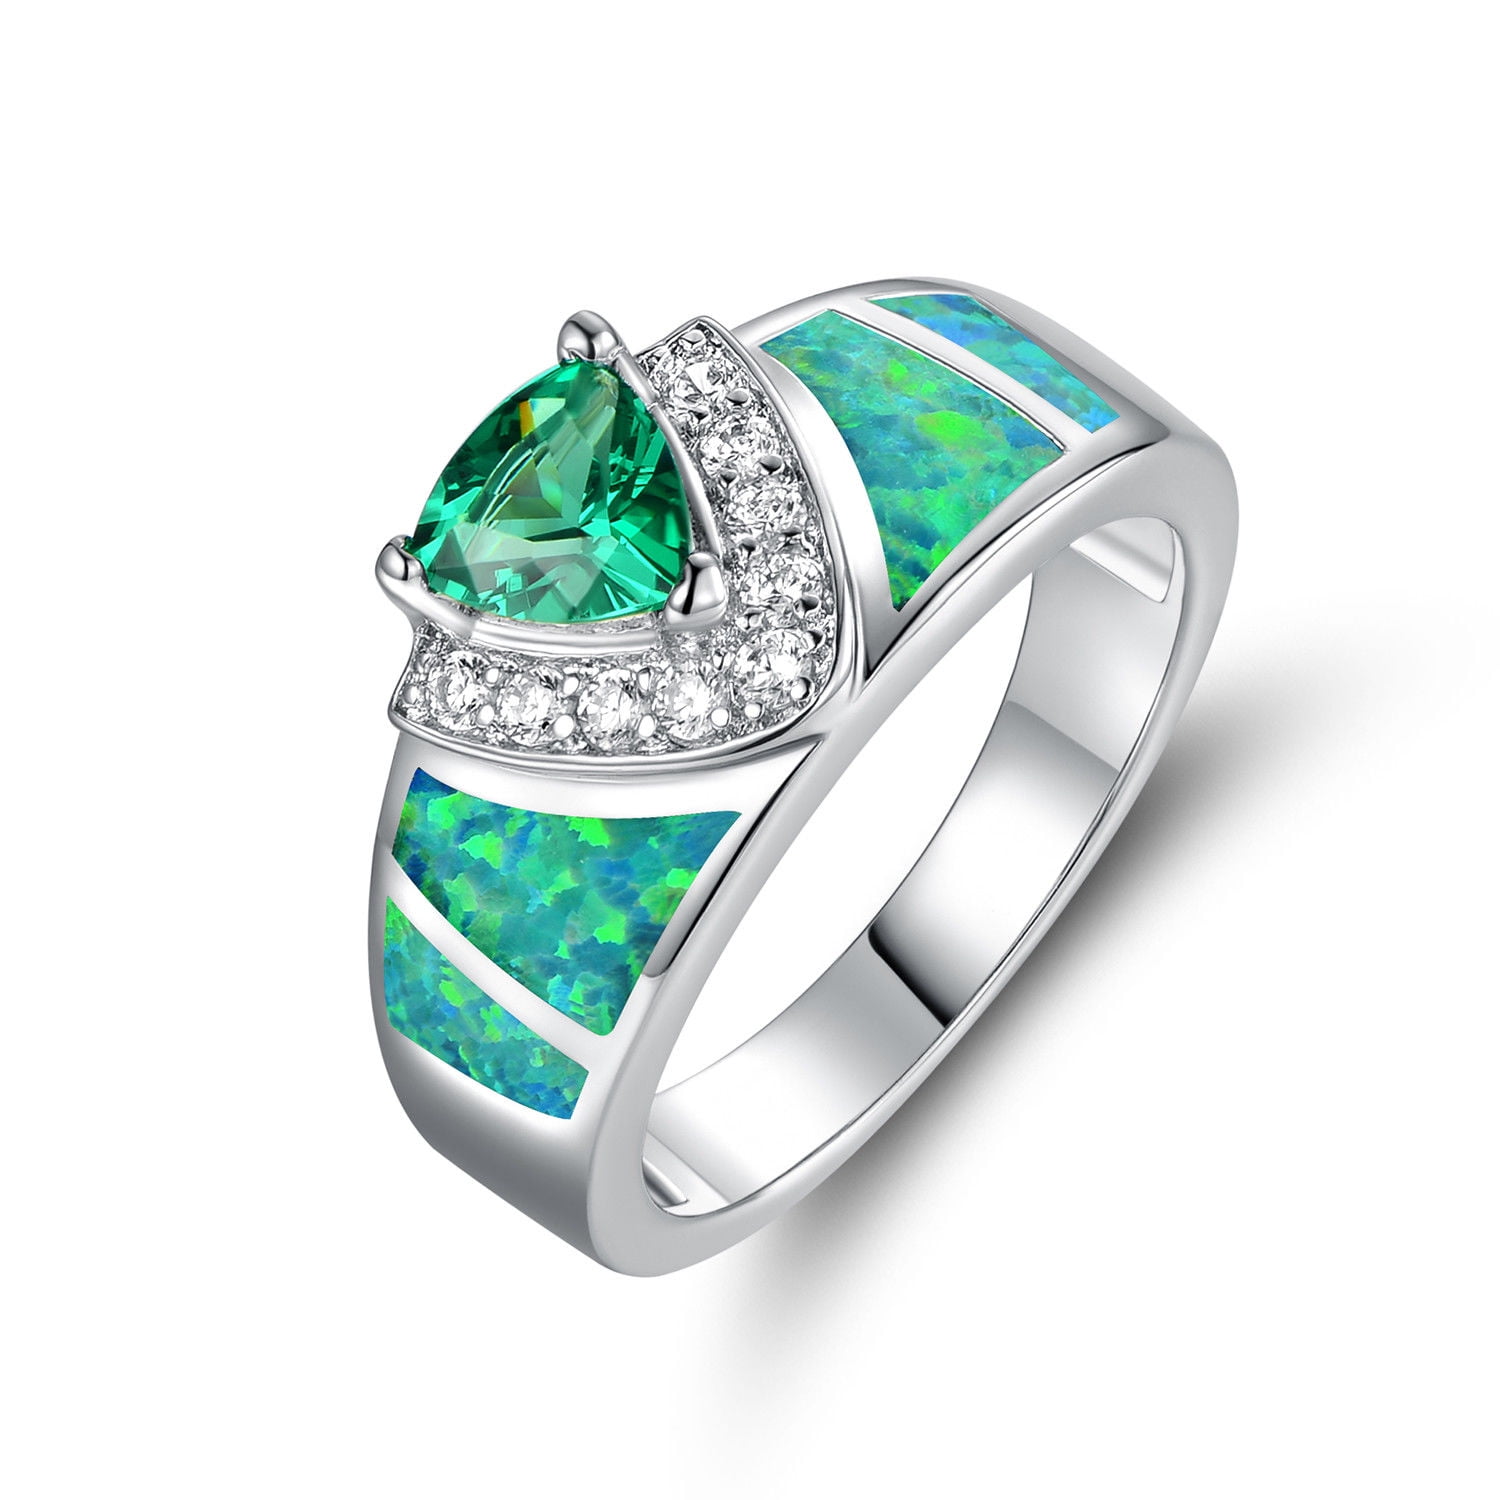 CiNily Silver Plated Green/Pink/White Fire Opal Ring Emerald Gemstone Ring Size 5-12 